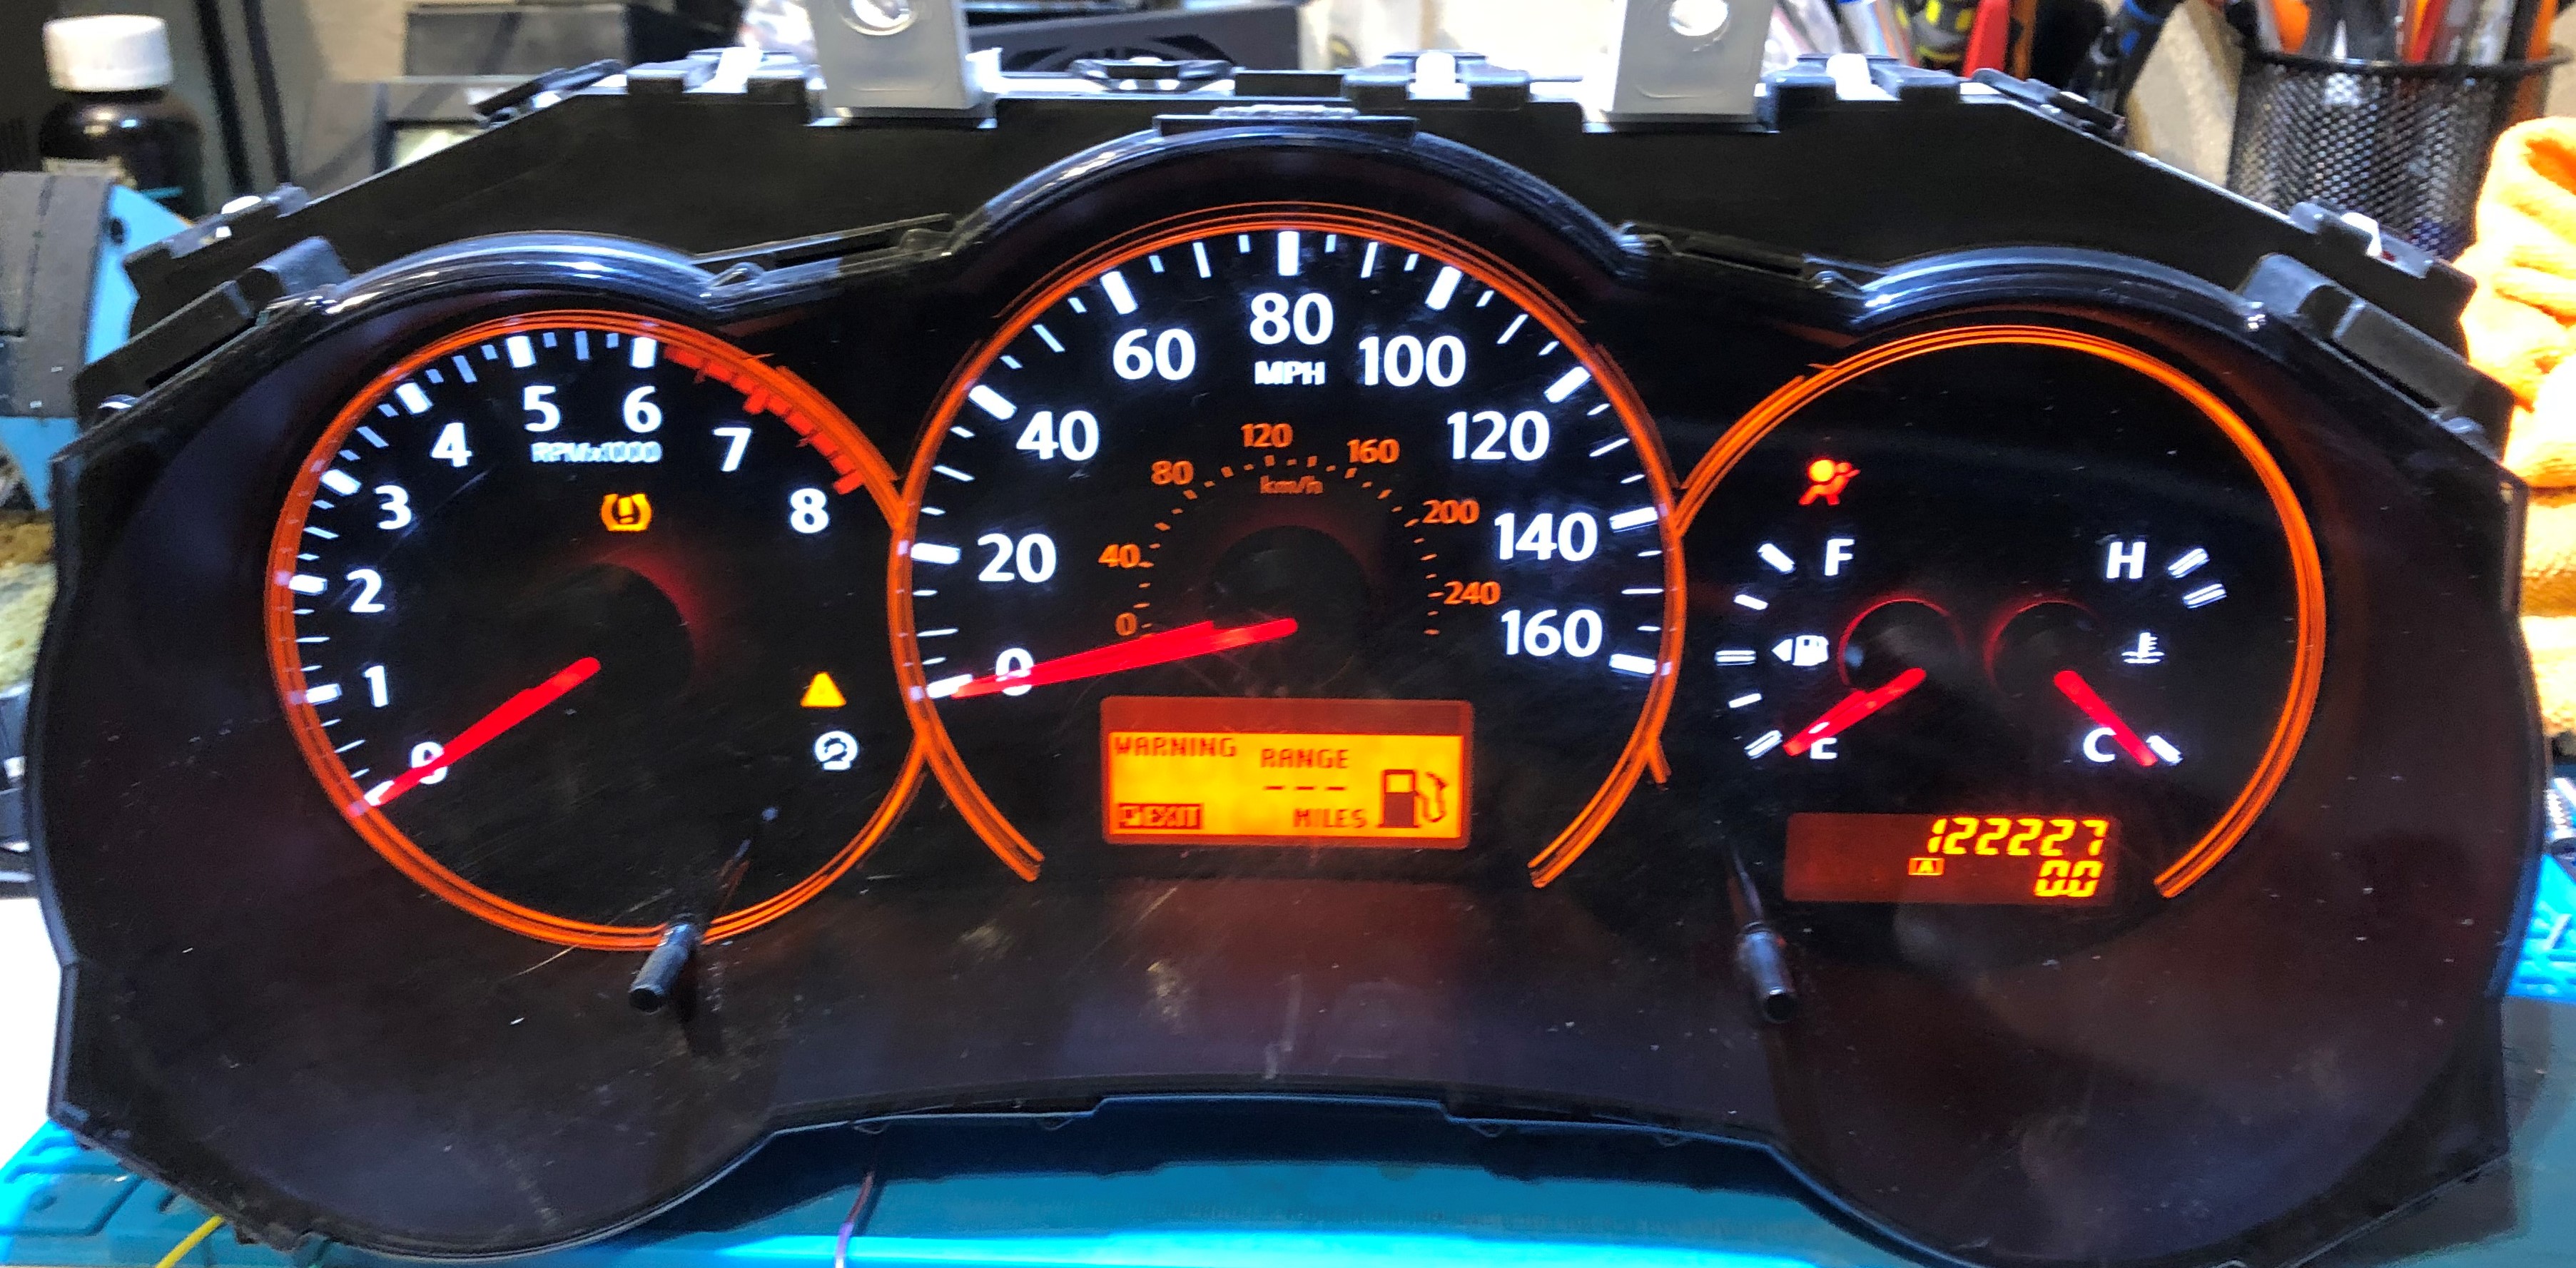 INSTRUMENT CLUSTER REPAIR SERVICE FOR 2005 TO 2008 NISSAN MAXIMA Fits: Nissan